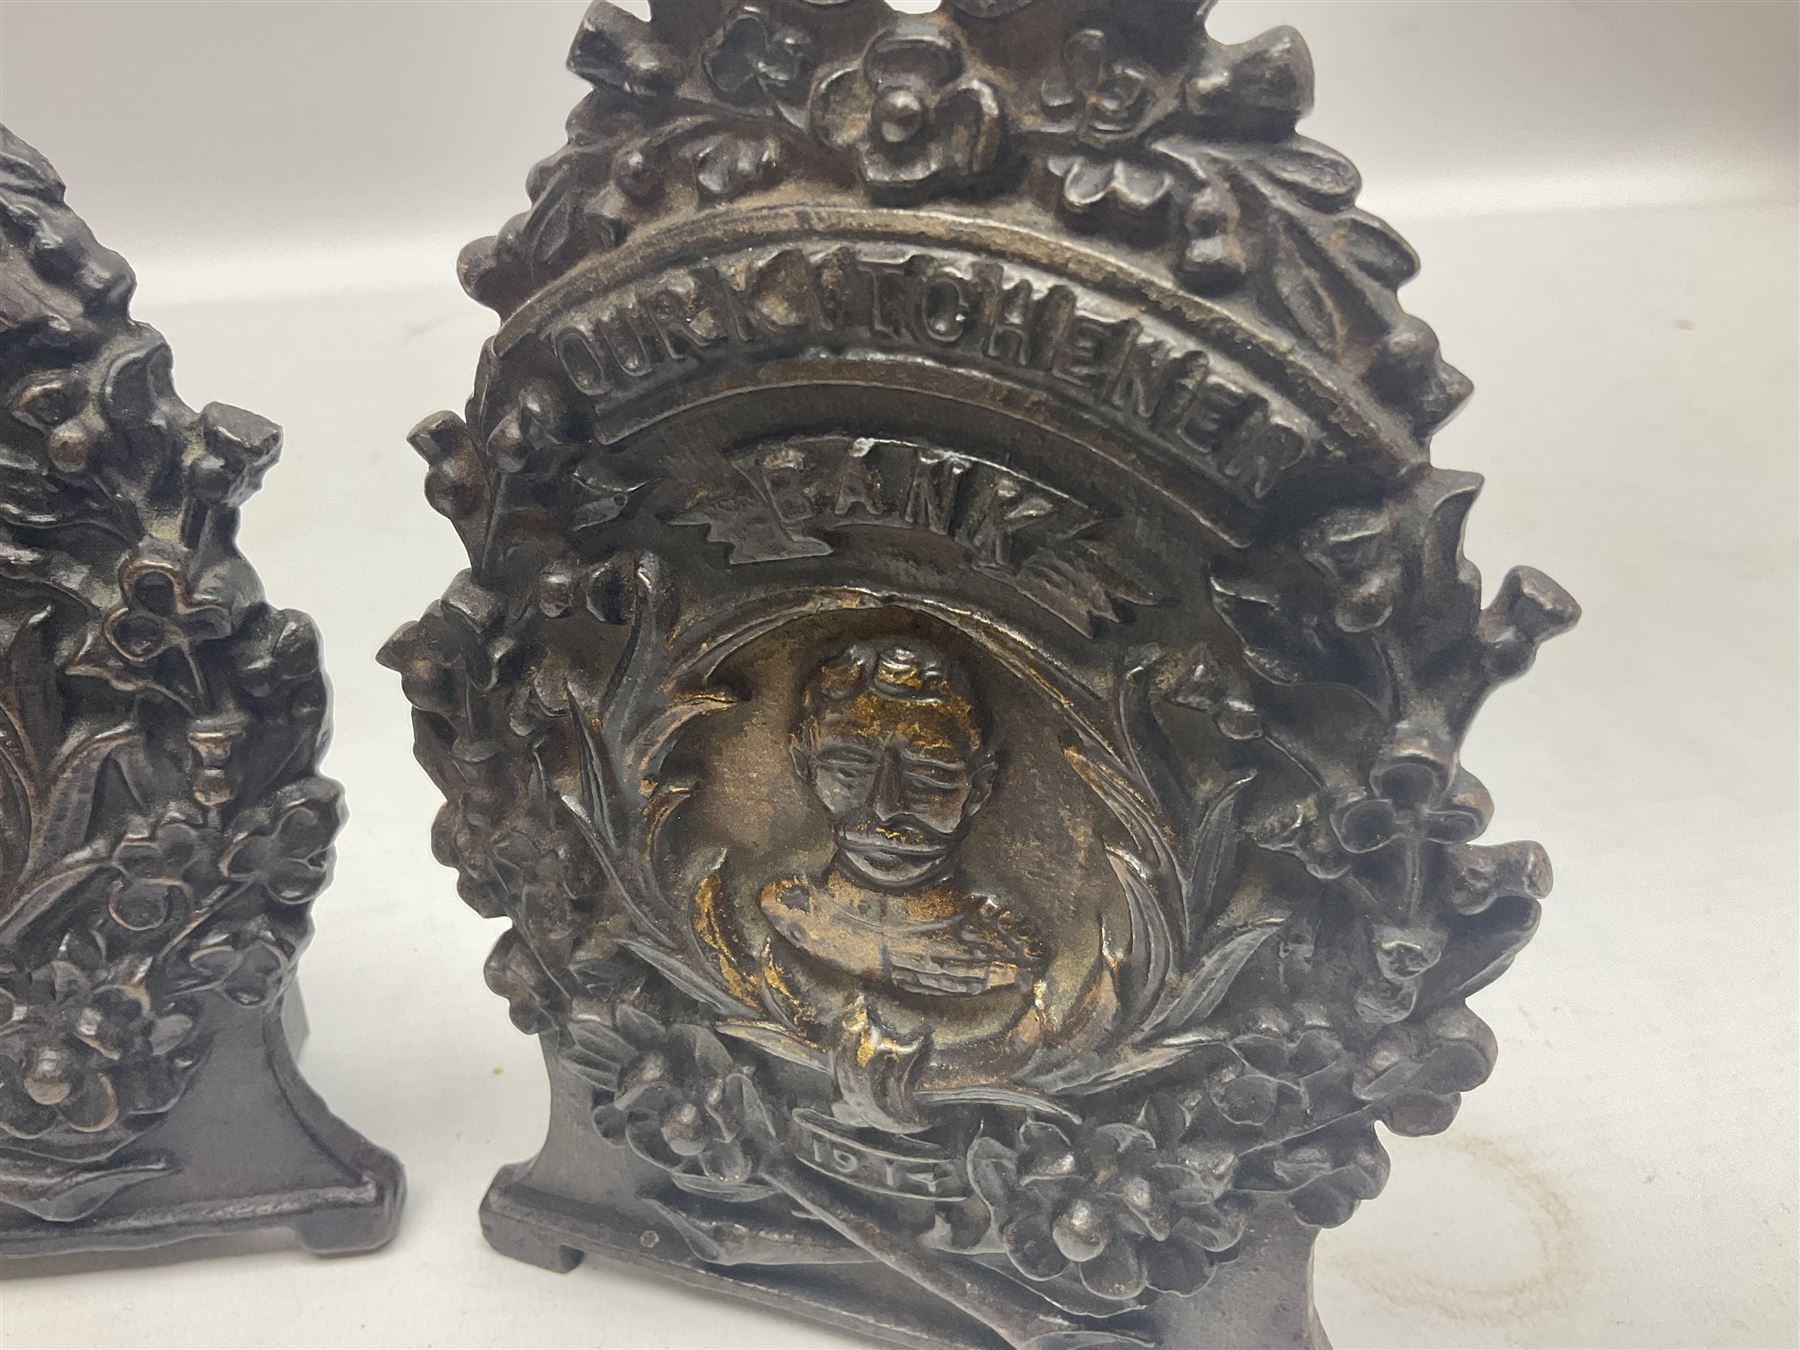 Two early 20th century cast-iron money banks - 'Our Kitchener Bank' c1914 H17cm and 'Our Empire Bank - Image 6 of 7